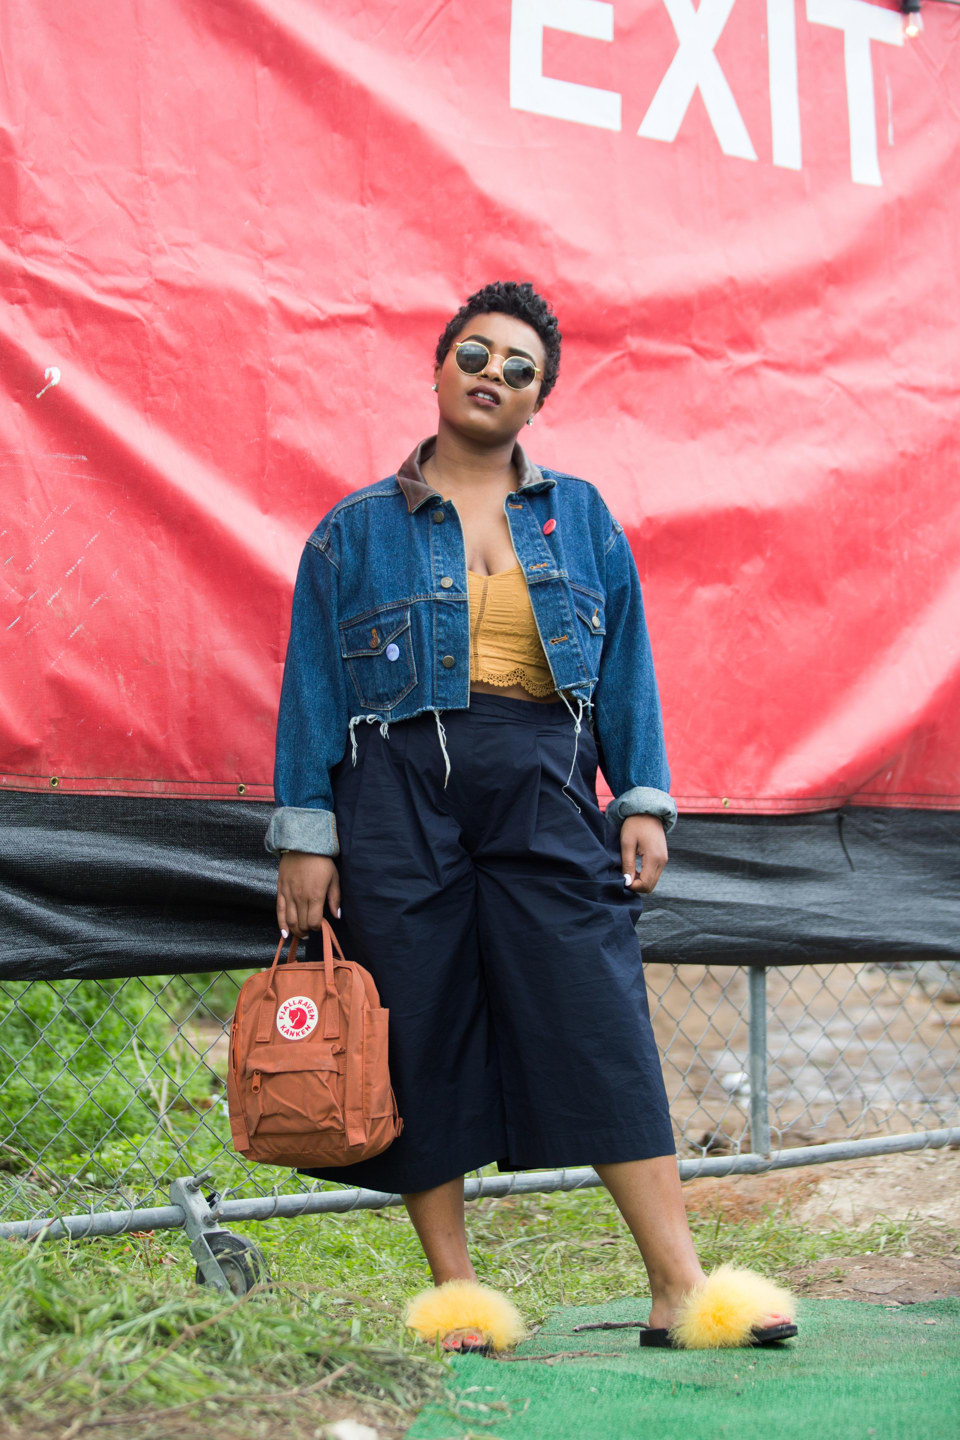 33 Really Fly-Looking Fits For You To Try This Spring